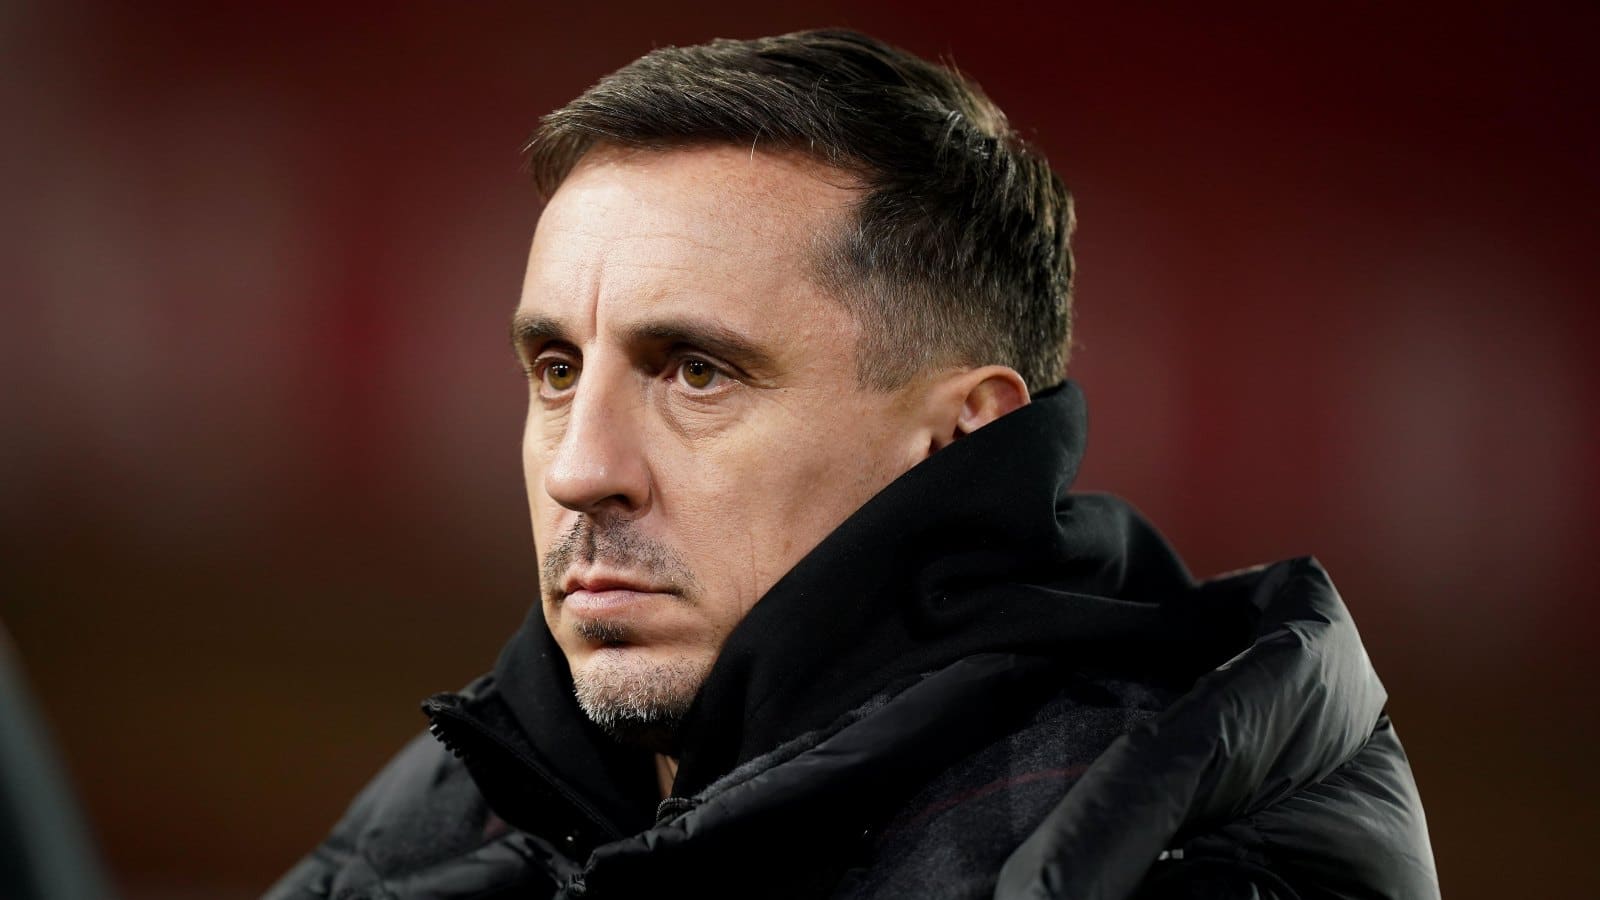 Gary Neville slams Bruno Fernandes for asking to be subbed off at 6-0 down to Liverpool